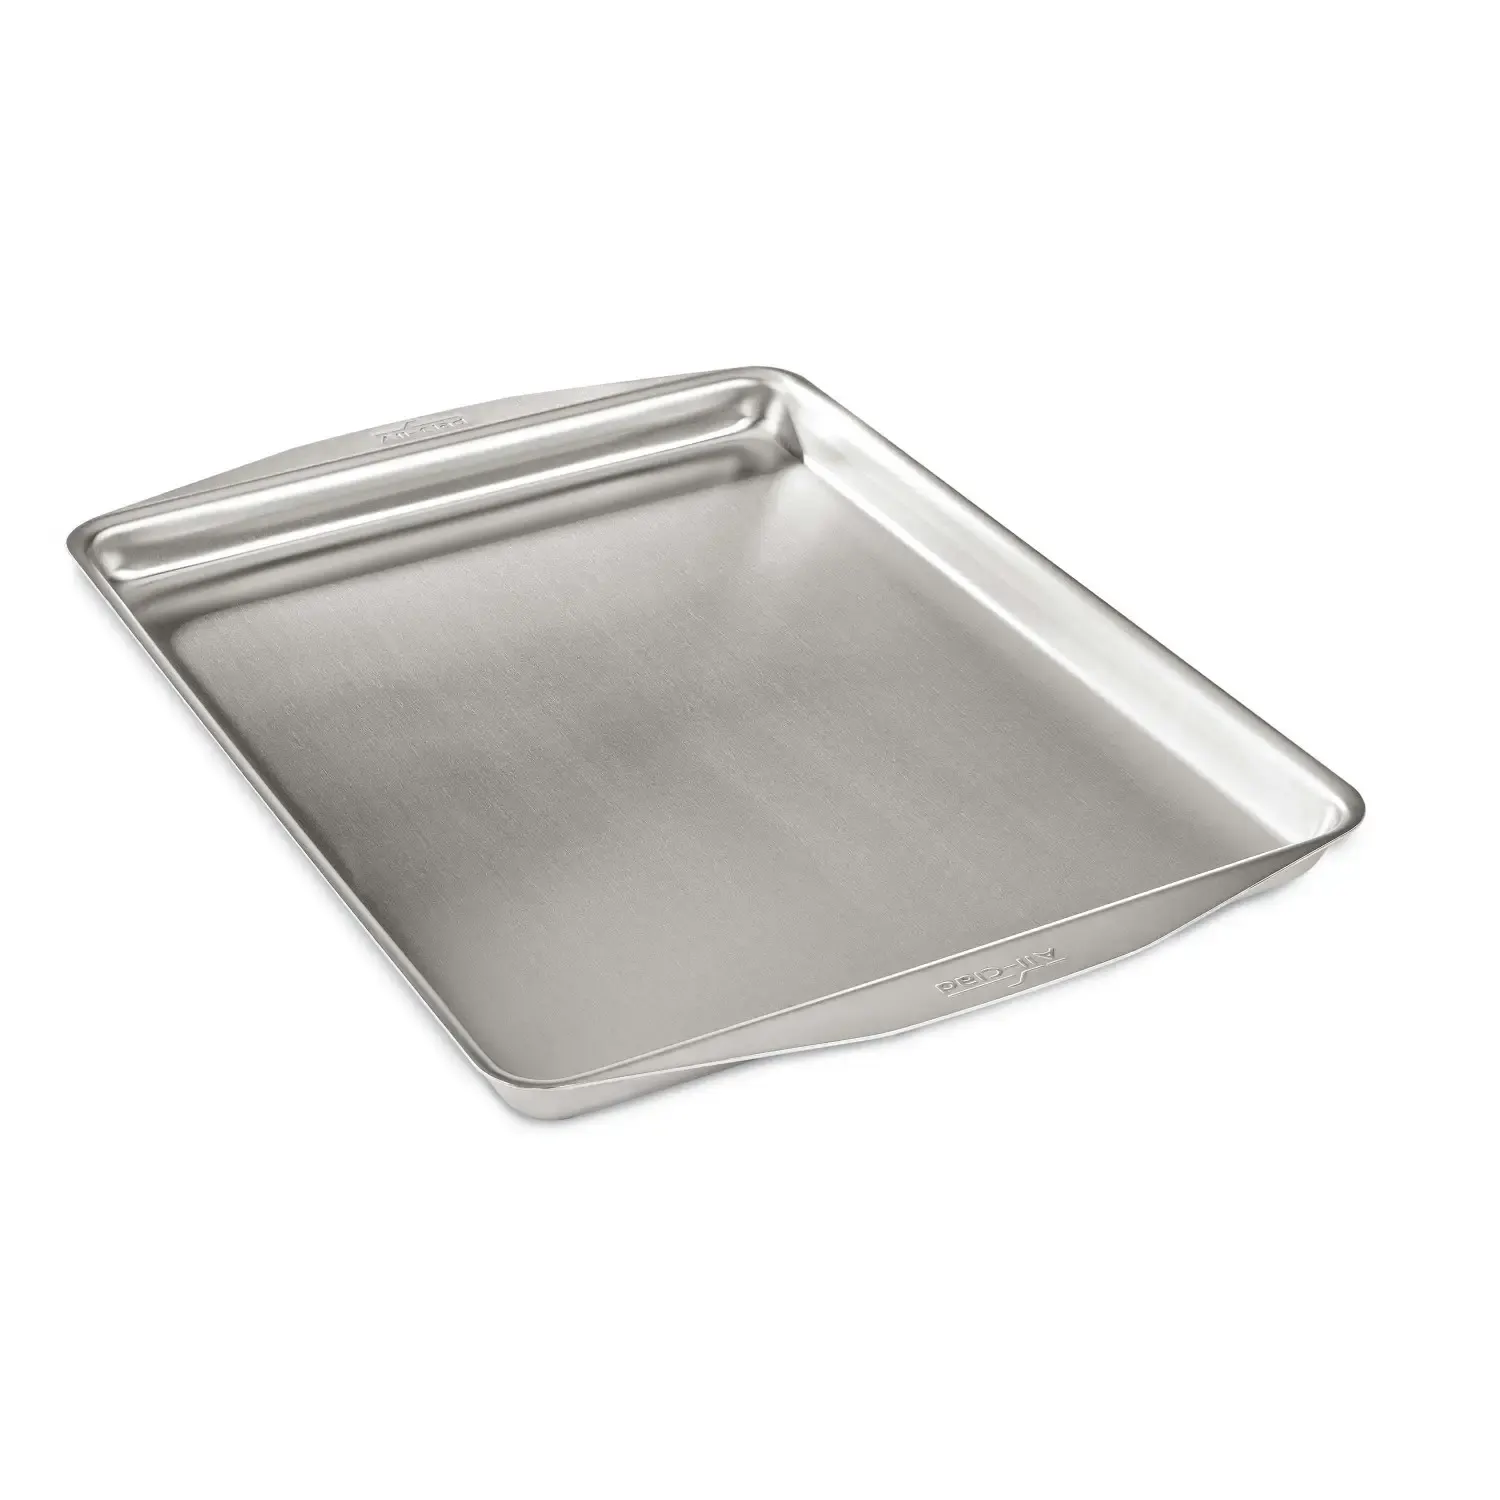 http://cdn.apartmenttherapy.info/image/upload/v1691511310/commerce/D3-Stainless-3-Ply-Bonded-Jelly-Roll-Pan-all-clad.webp